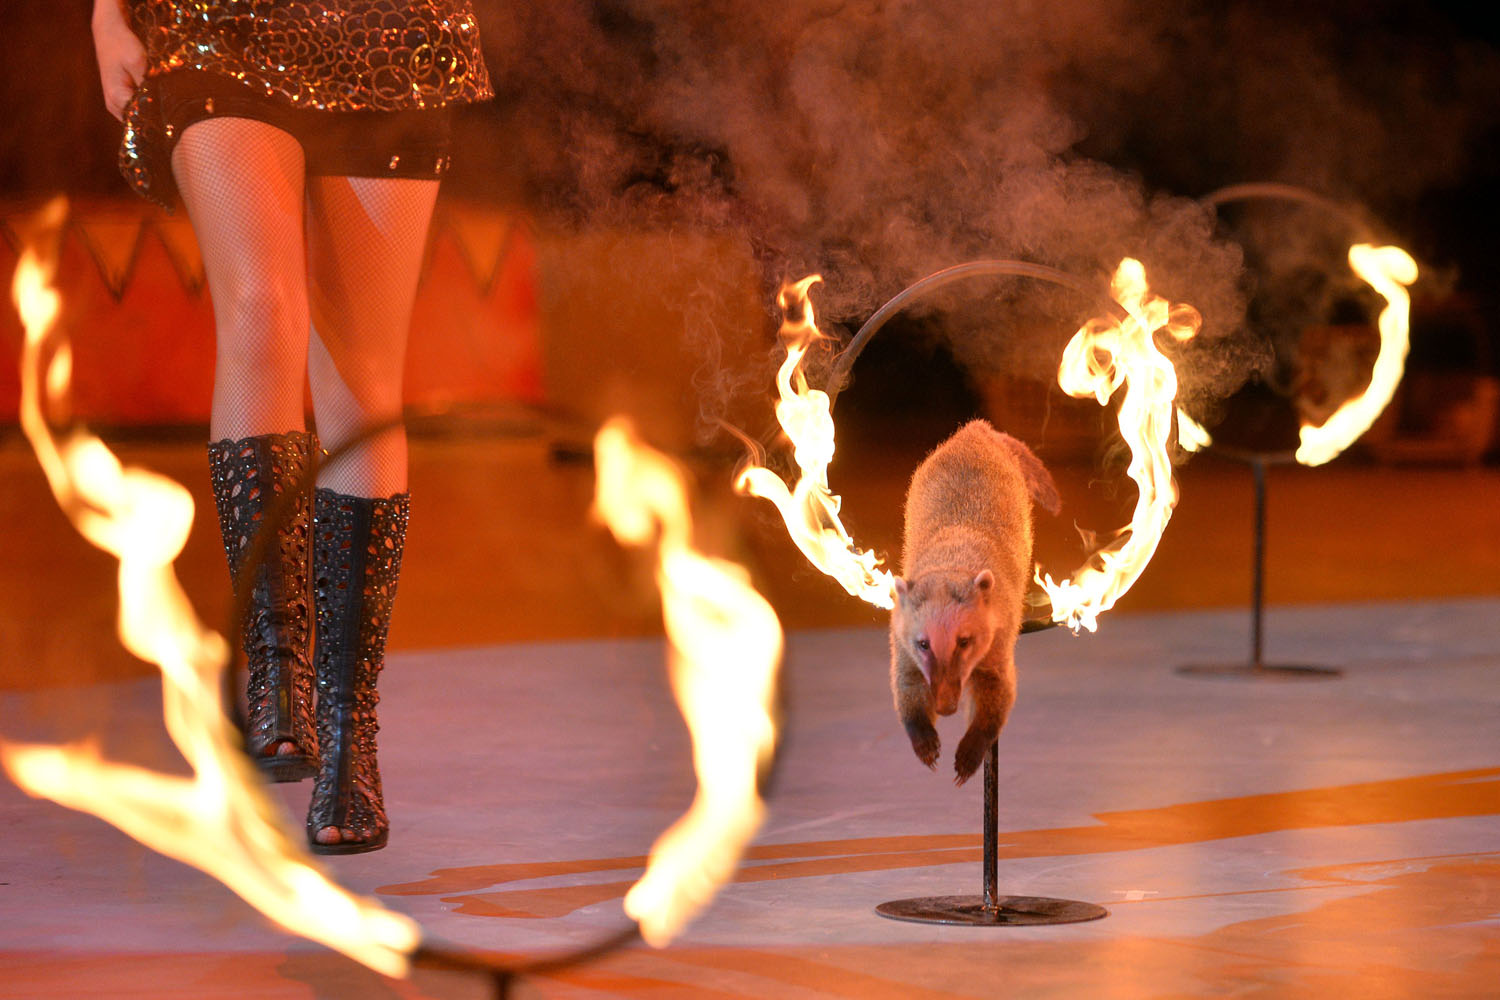 A coati, or Brazilian aardvark, jumps through burning hoops during a show called  The Caravan of Wonders  at the National Circus in Kiev.